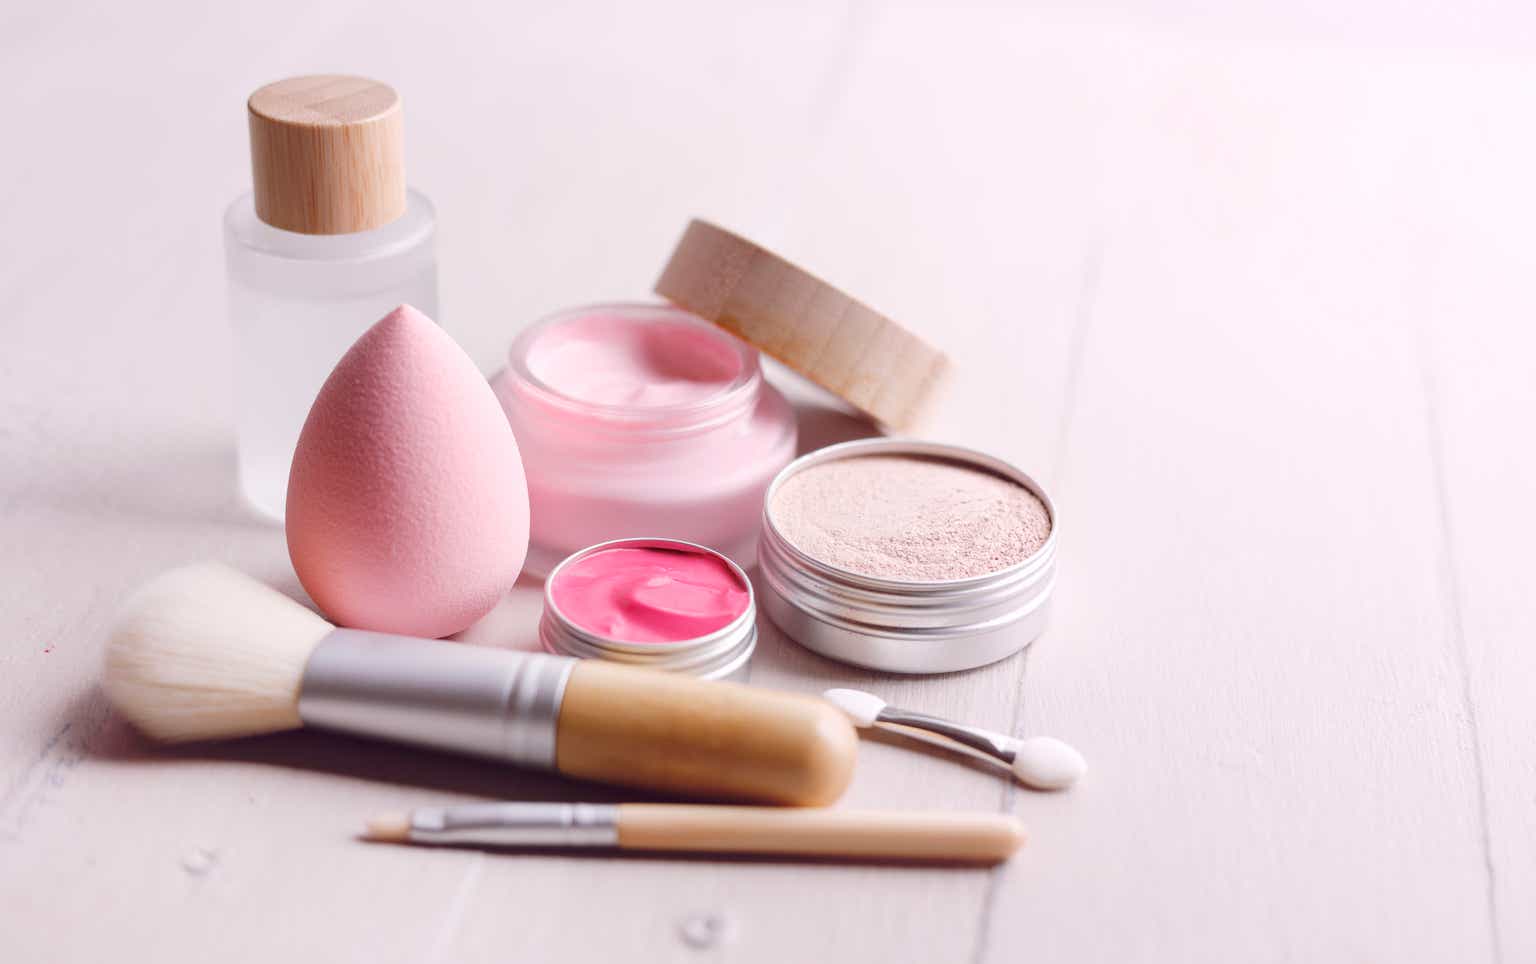 Read more about the article Elf Beauty: The market pays too much for cheap cosmetics (NYSE:ELF)